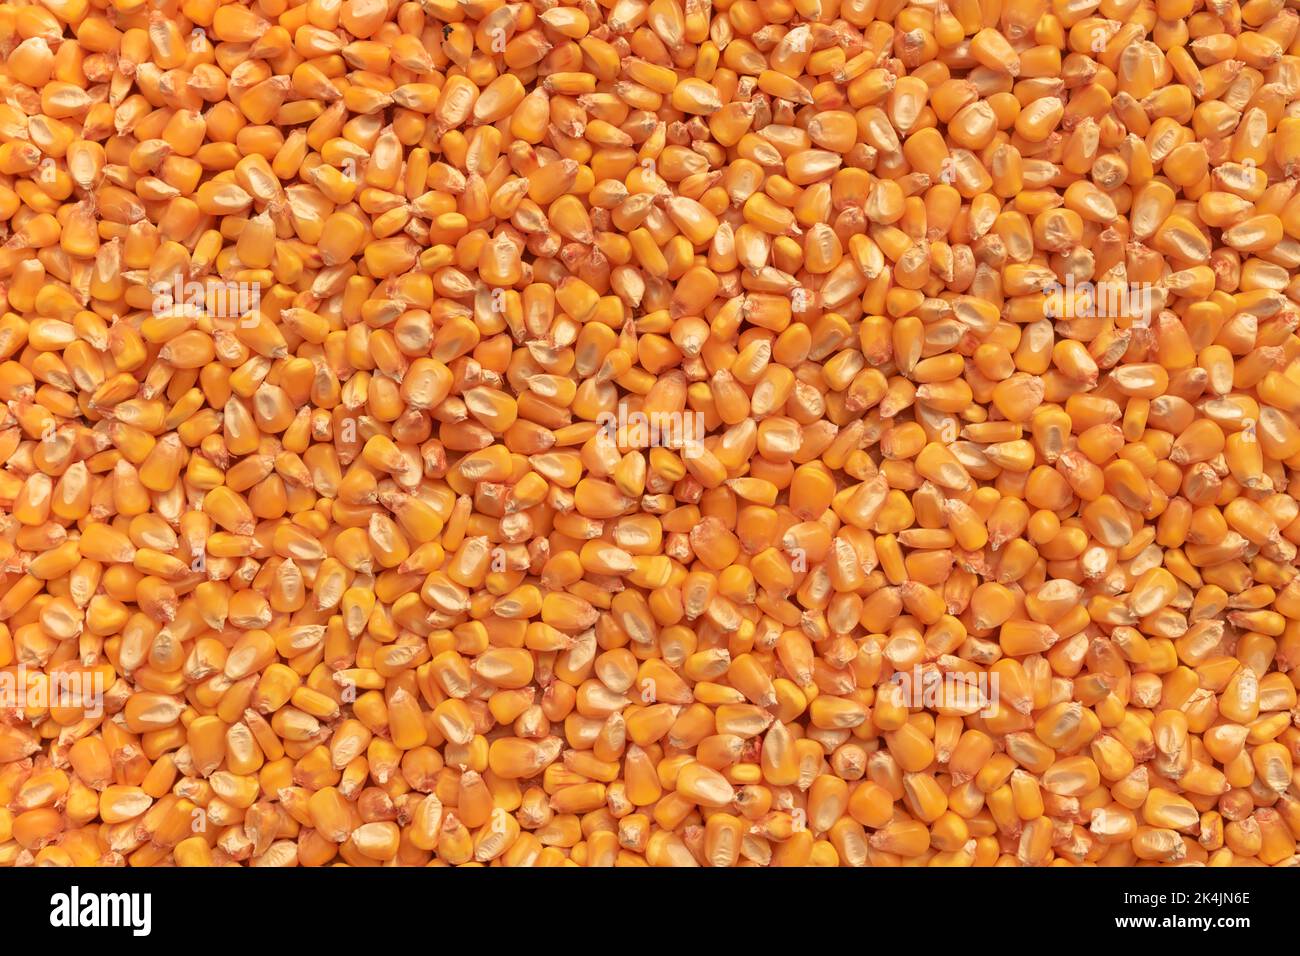 Top view of harvested corn grains as background, ripe harvested maize seed Stock Photo